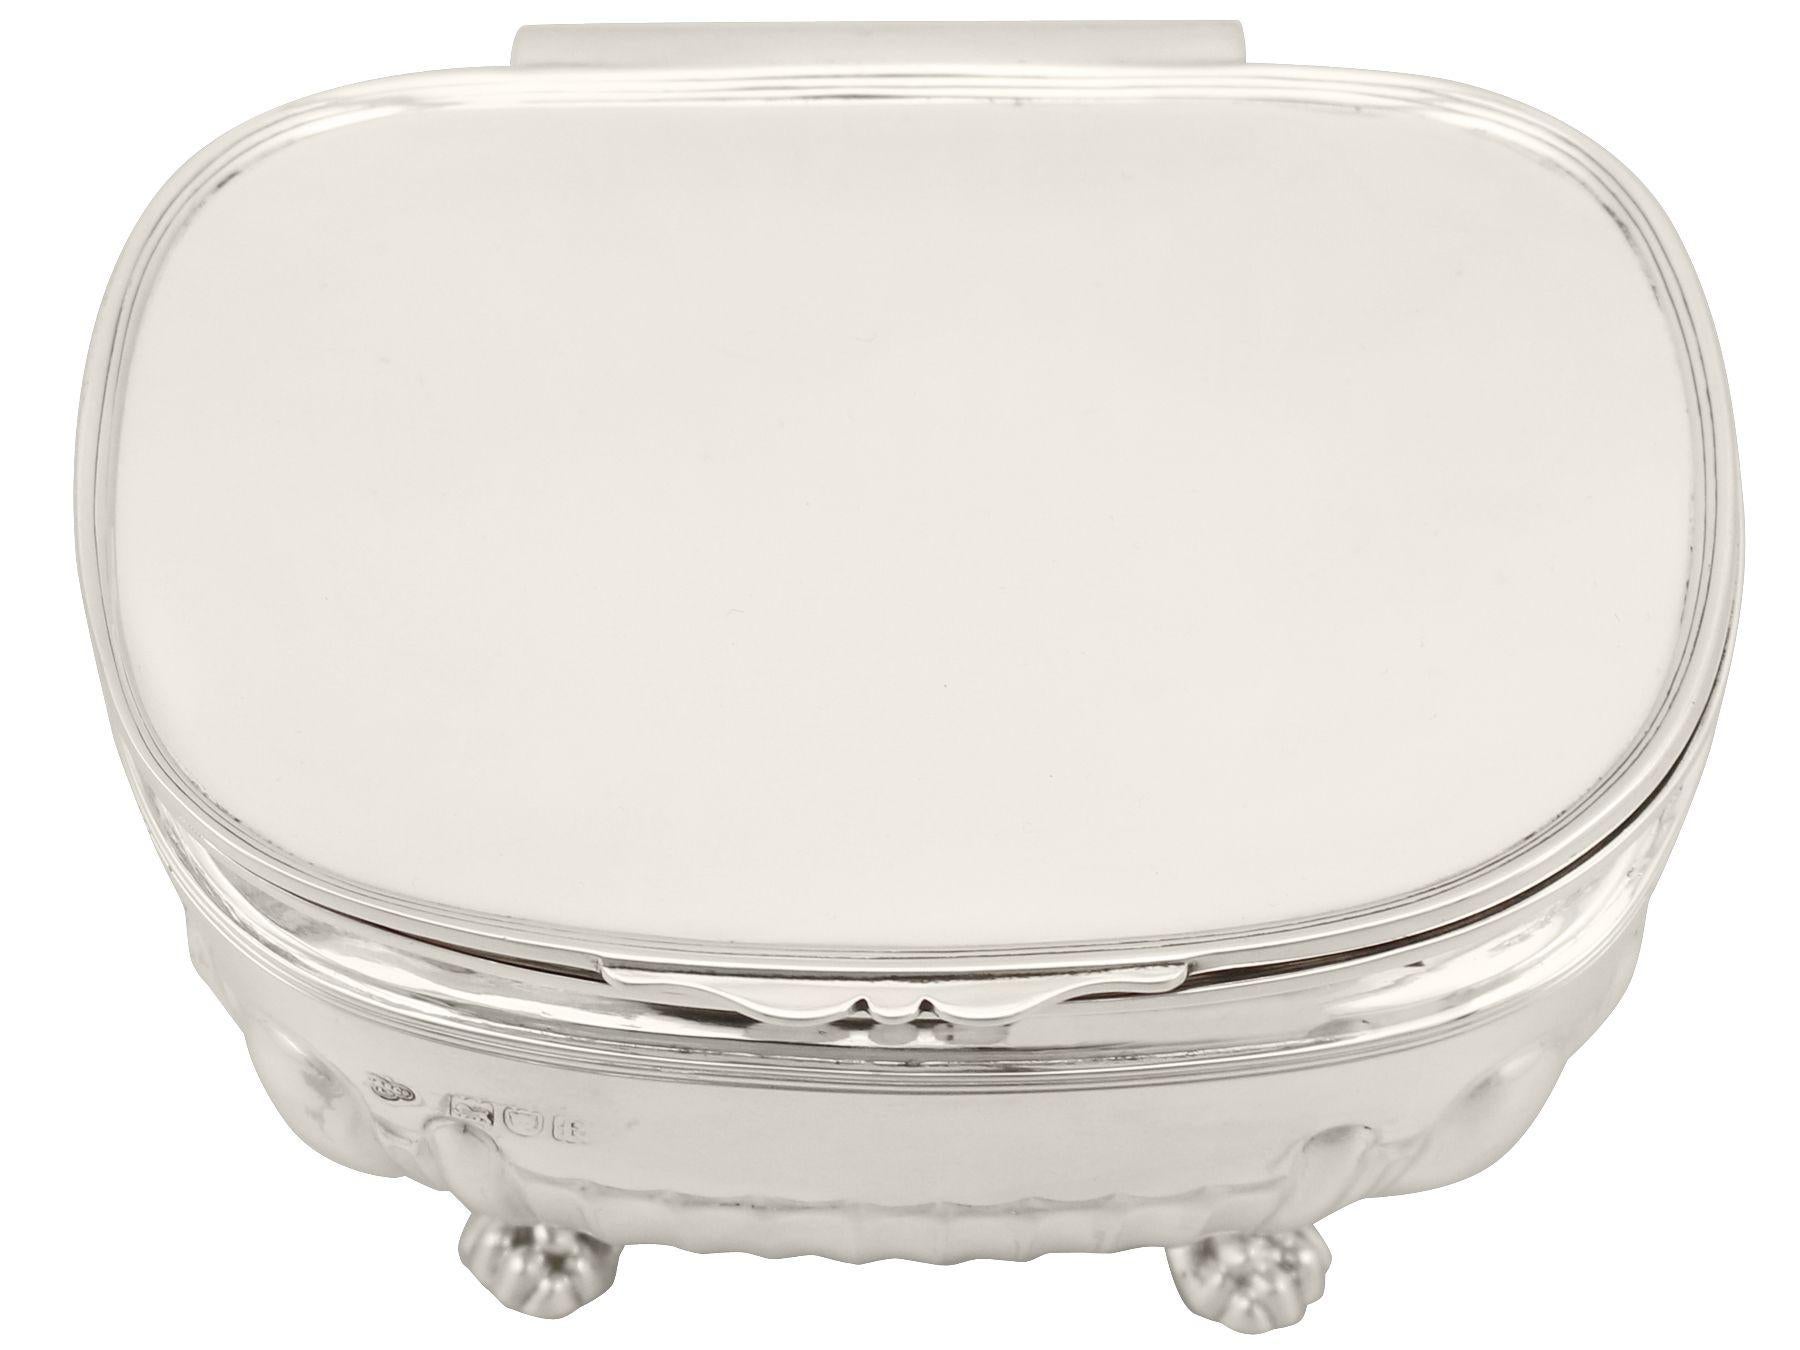 An exceptional, fine and impressive antique Edwardian English sterling silver tea caddy made in the Regency style; an addition to our silver teaware collection

This exceptional antique Edwardian sterling silver tea caddy has a rounded rectangular